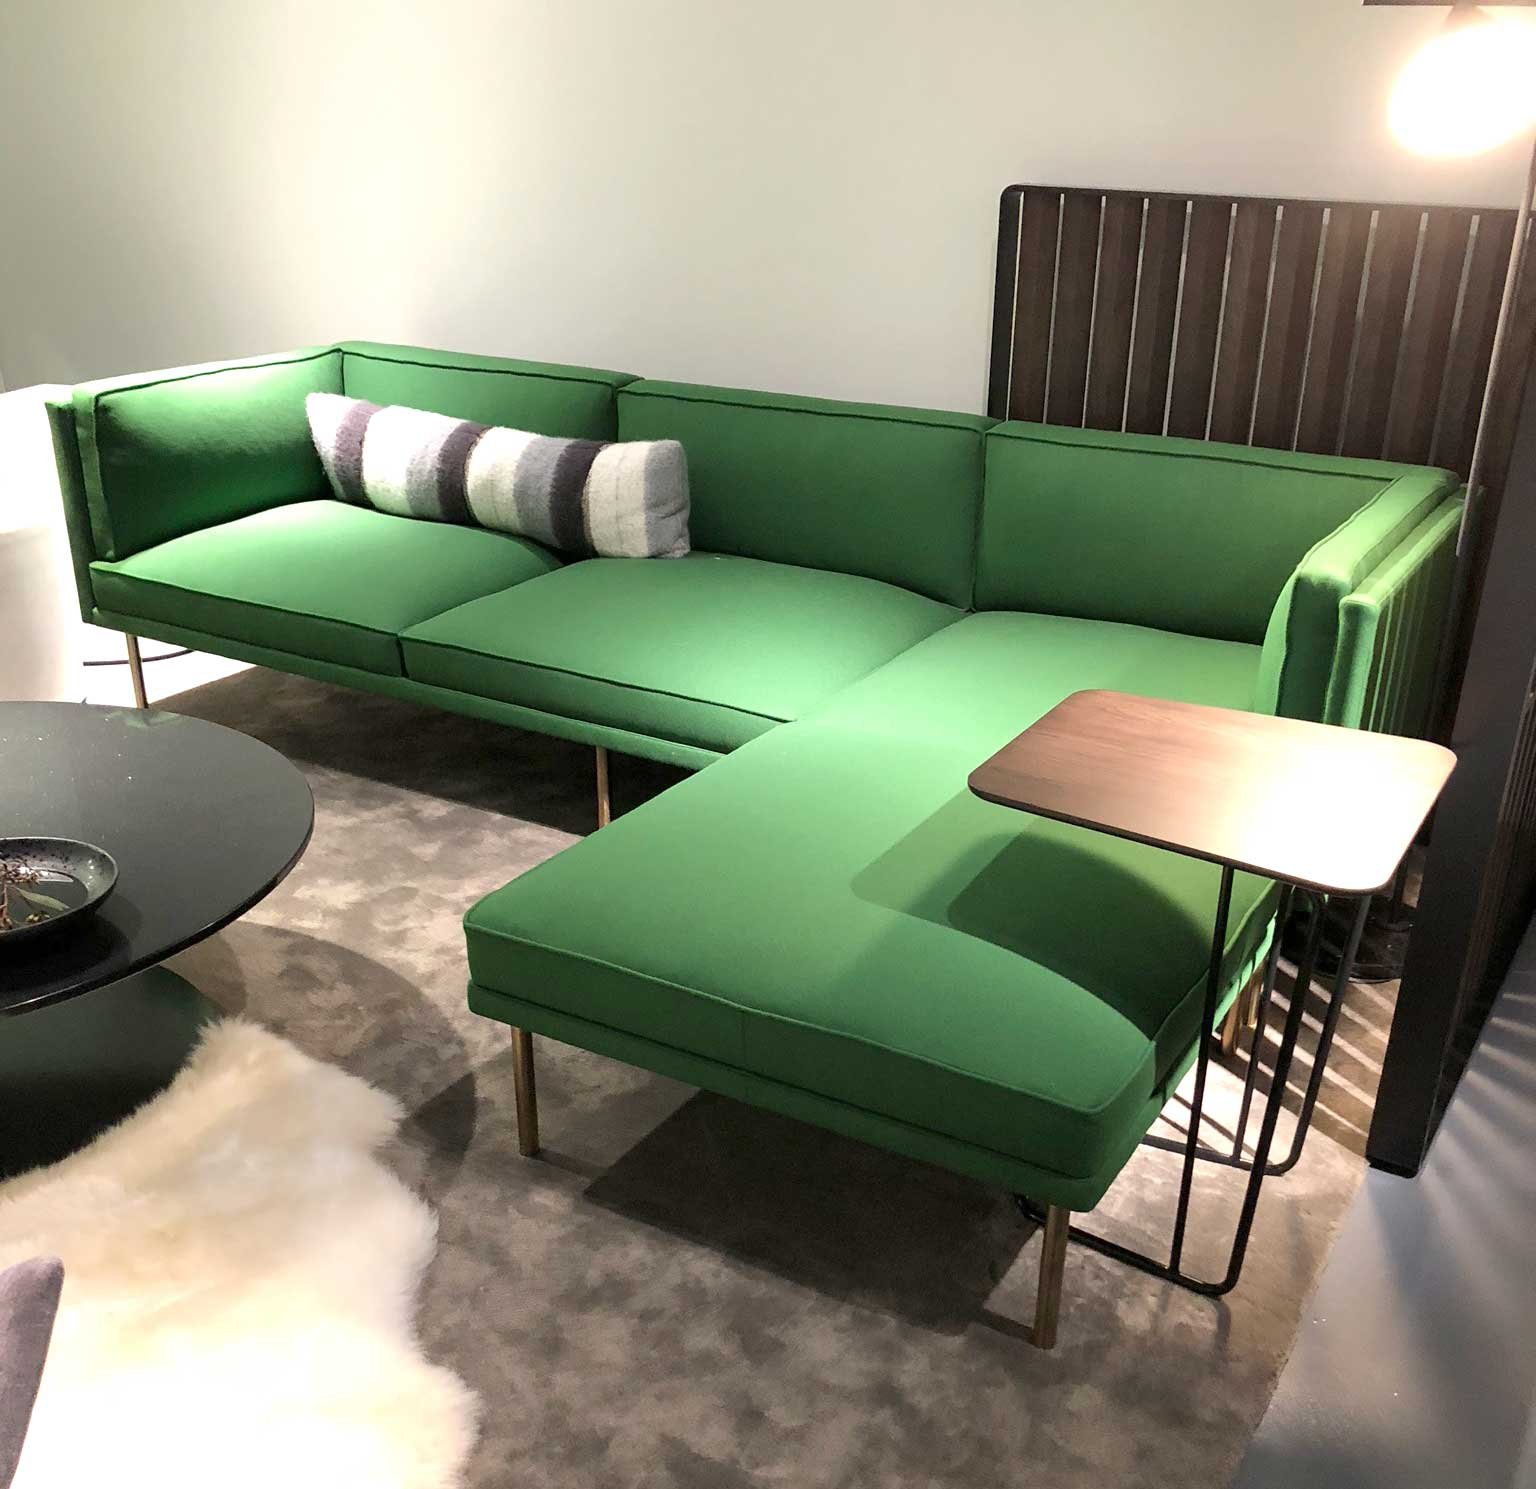 5 Trends We Saw at NeoCon 2018 from Unisource Solutions - 3. streamlined furniture